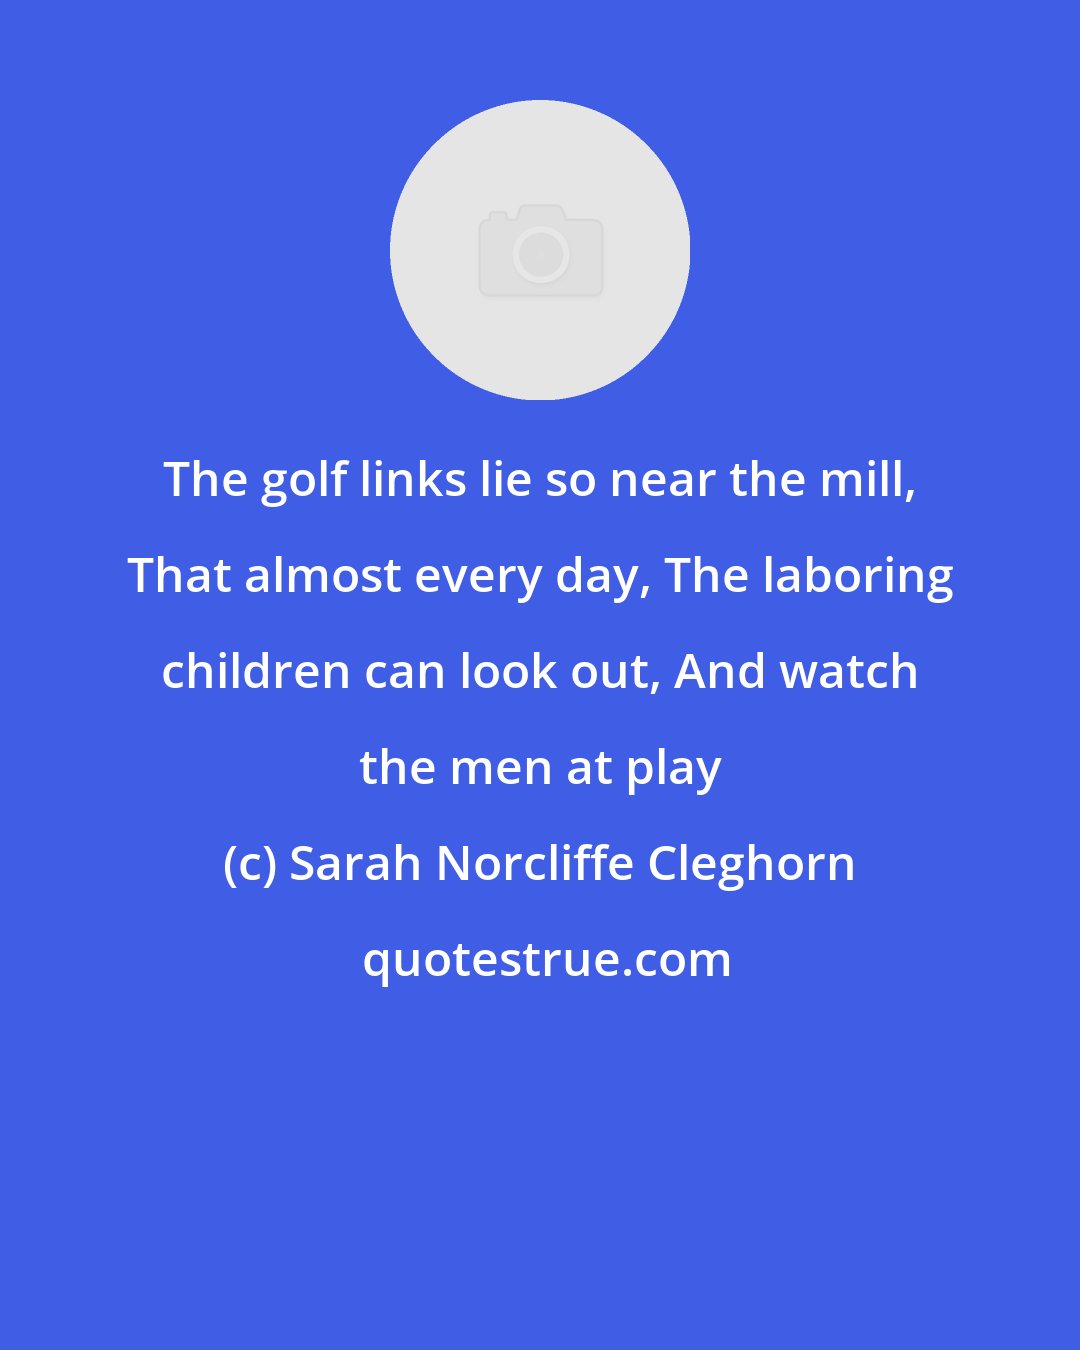 Sarah Norcliffe Cleghorn: The golf links lie so near the mill, That almost every day, The laboring children can look out, And watch the men at play